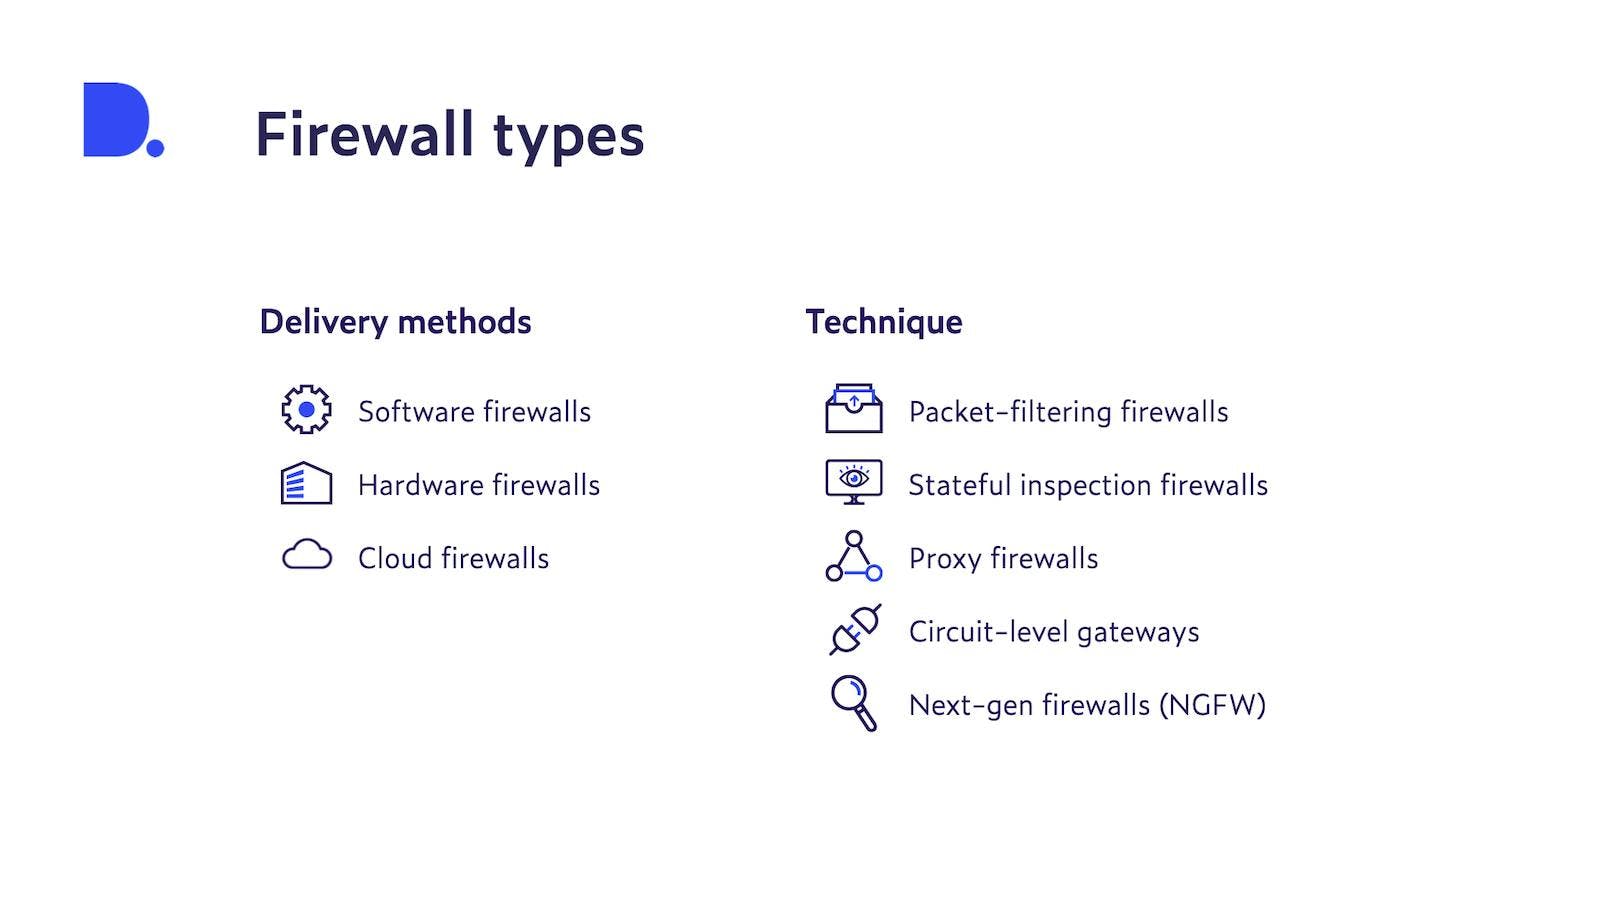 Overview of firewall delivery methods and operating techniques; Source: Dataprovider.com